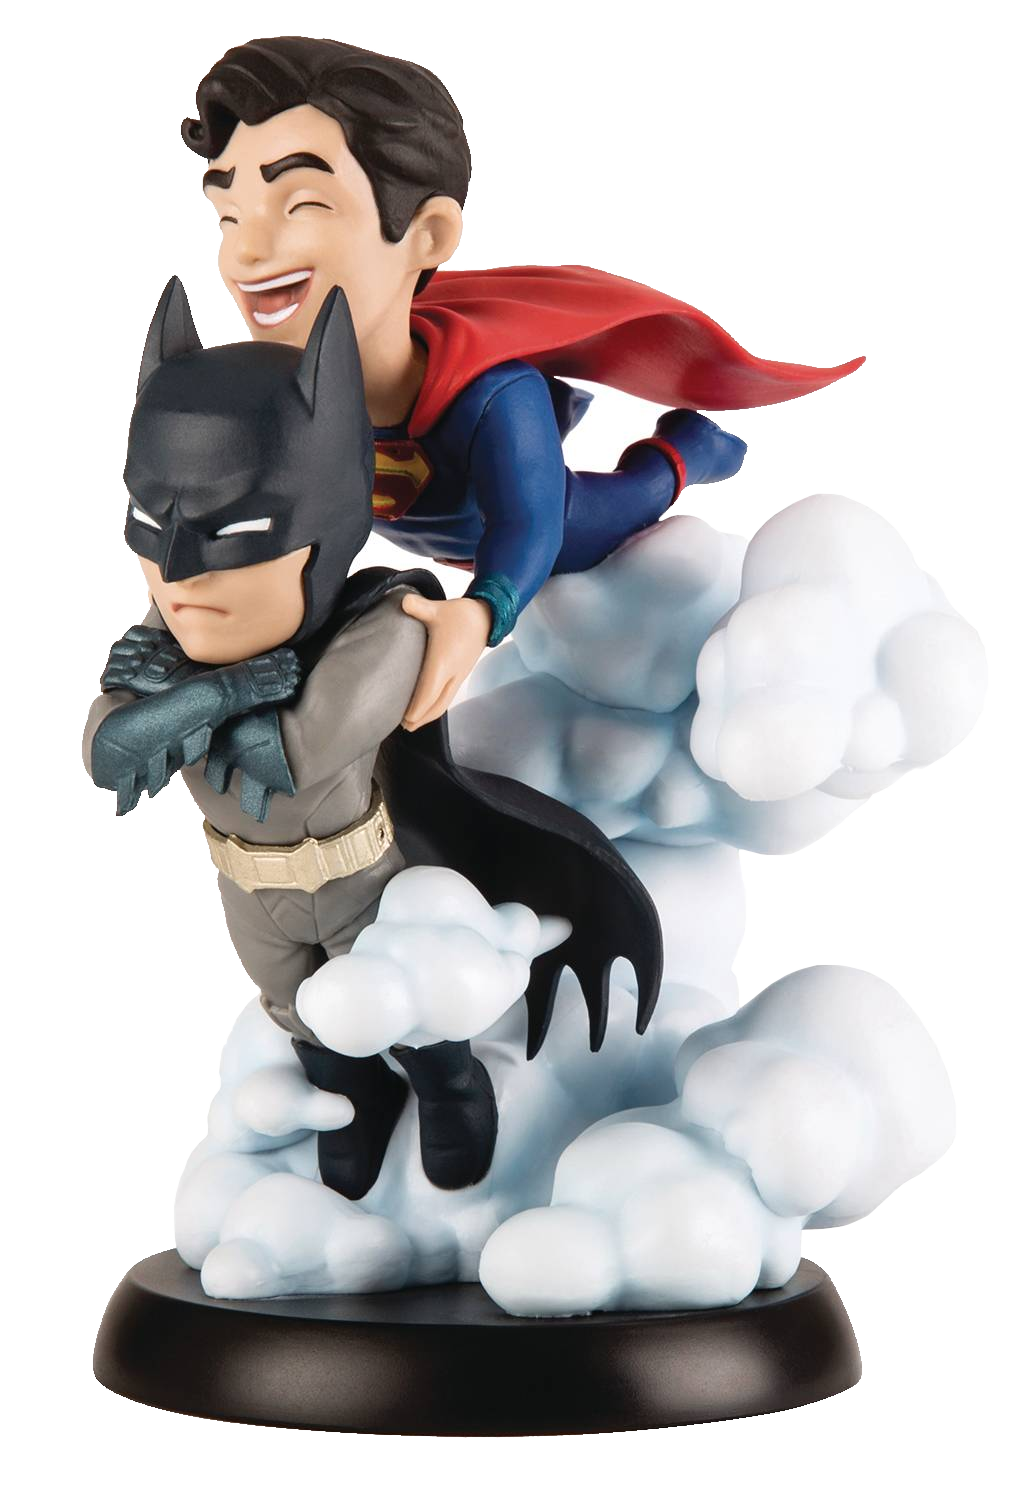 Q-FIG WORLDS FINEST MAX TOONS FIGURE